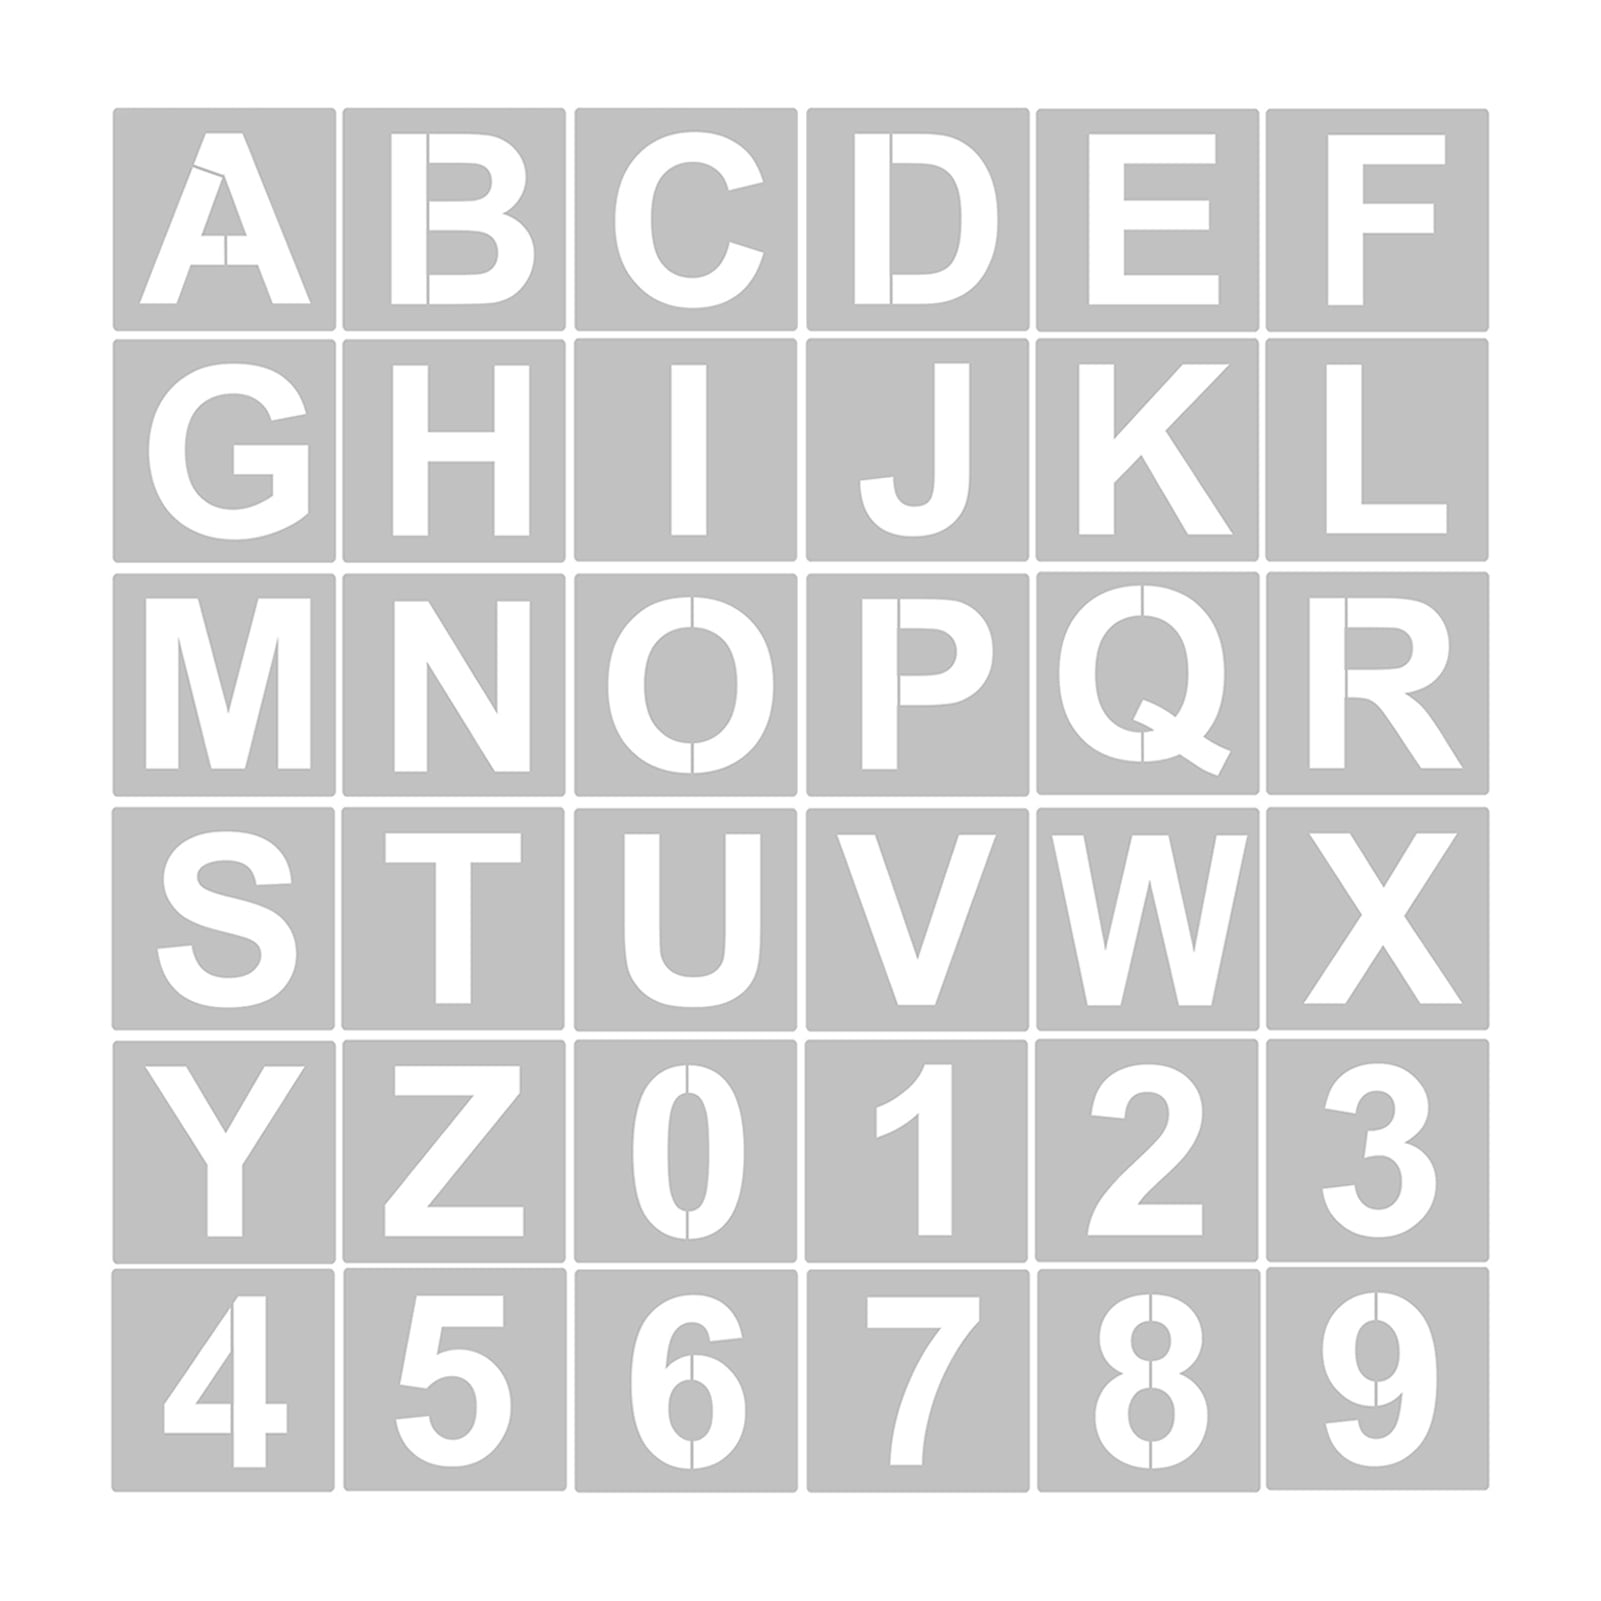 36pcs 5 Inch Letter And Number Stencils Reusable Washable Alphabet Stencils Environment friendly PET Art Craft Templates For Painting On Wood Fabric Wall Door Decor Home Sign Walmart - Free Printable 3 Inch Number Stencils